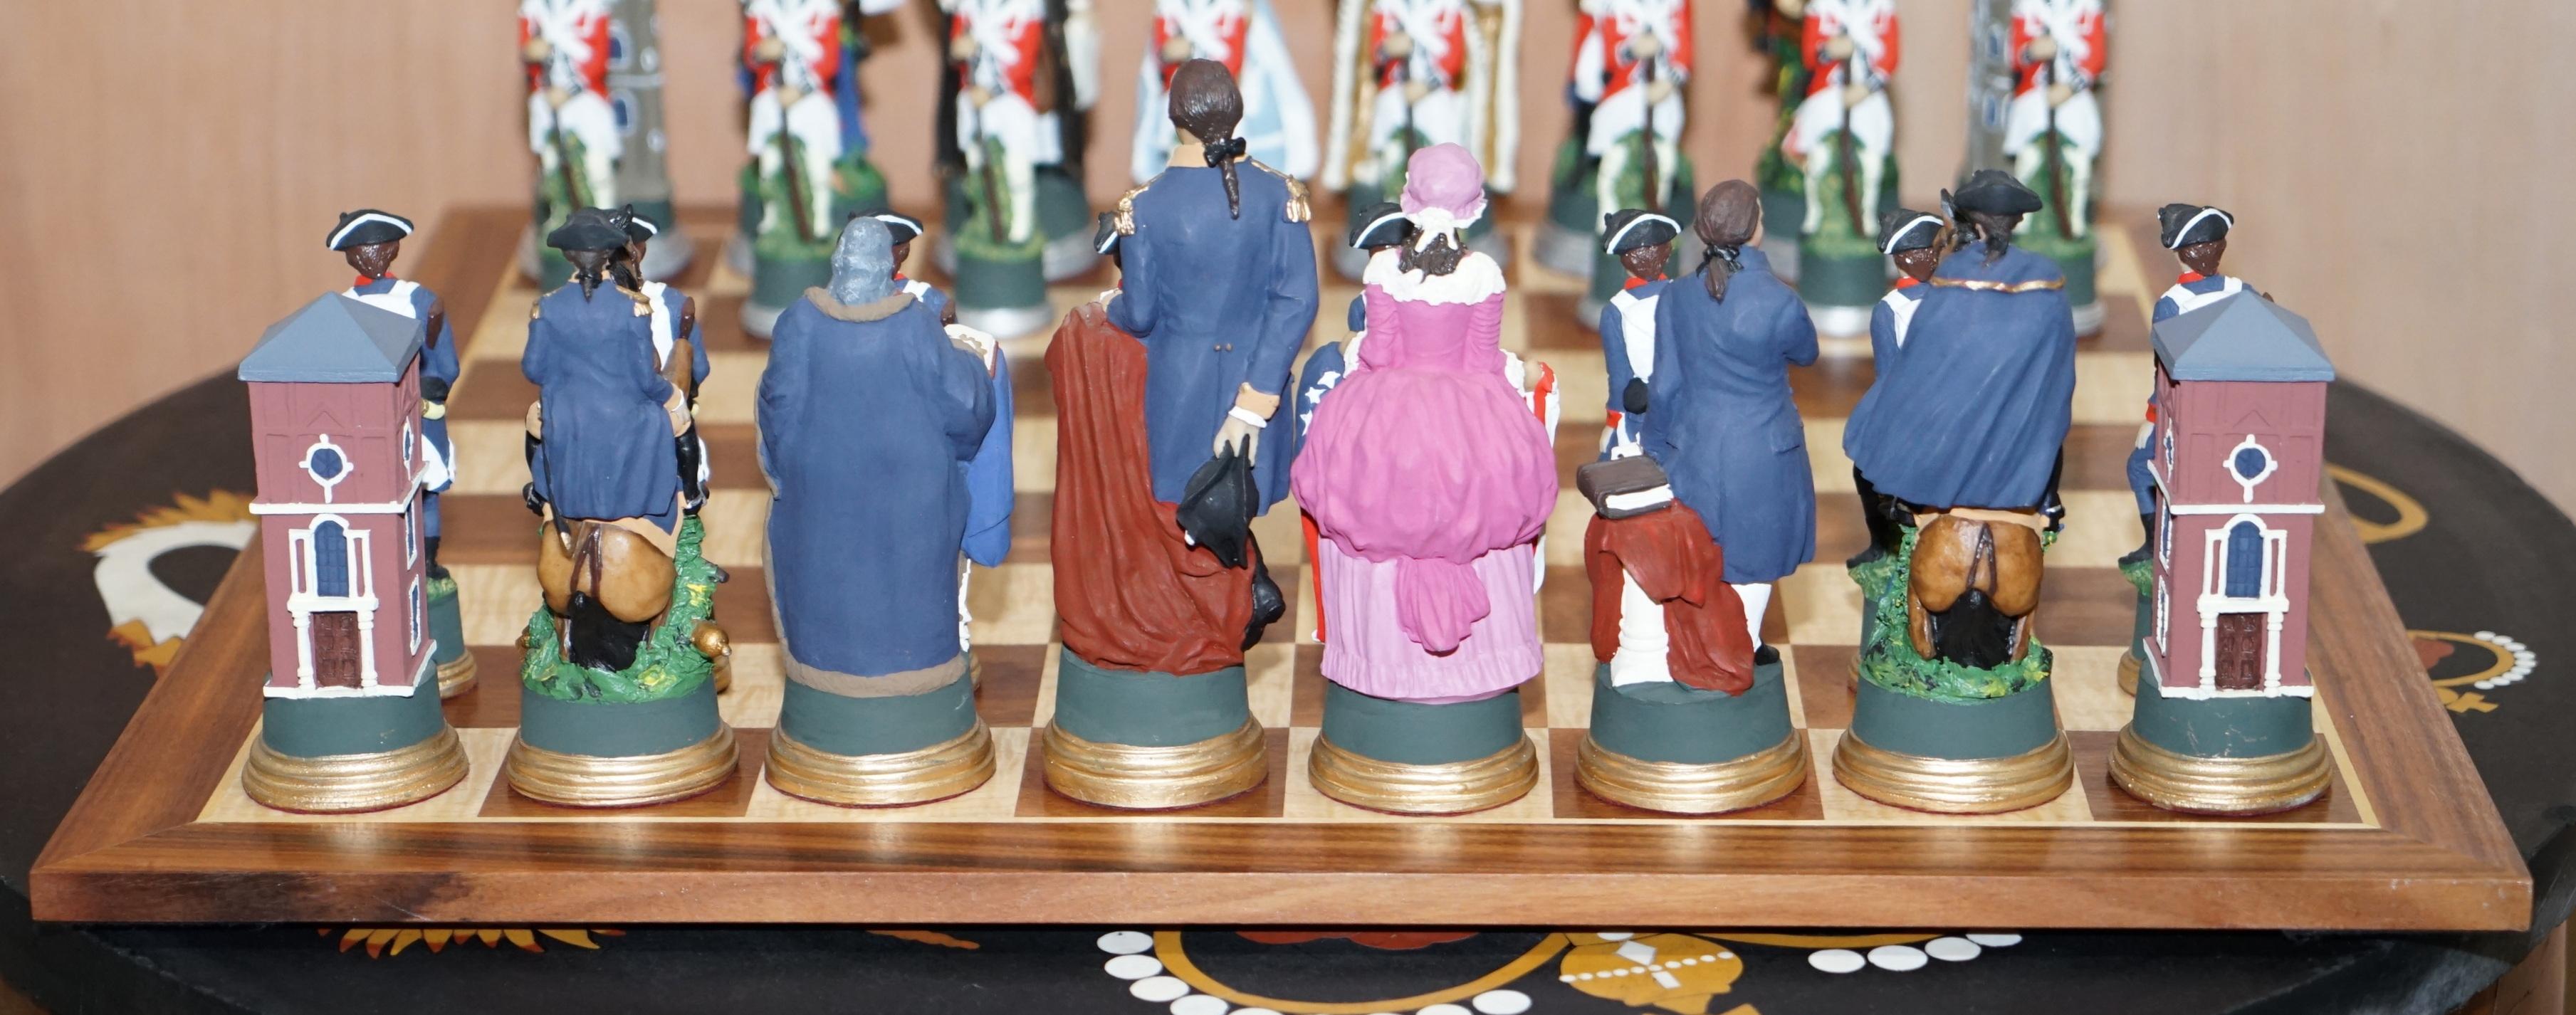 English Very Rare Collectors American Civil War of Independence Hand Painted Chess Set